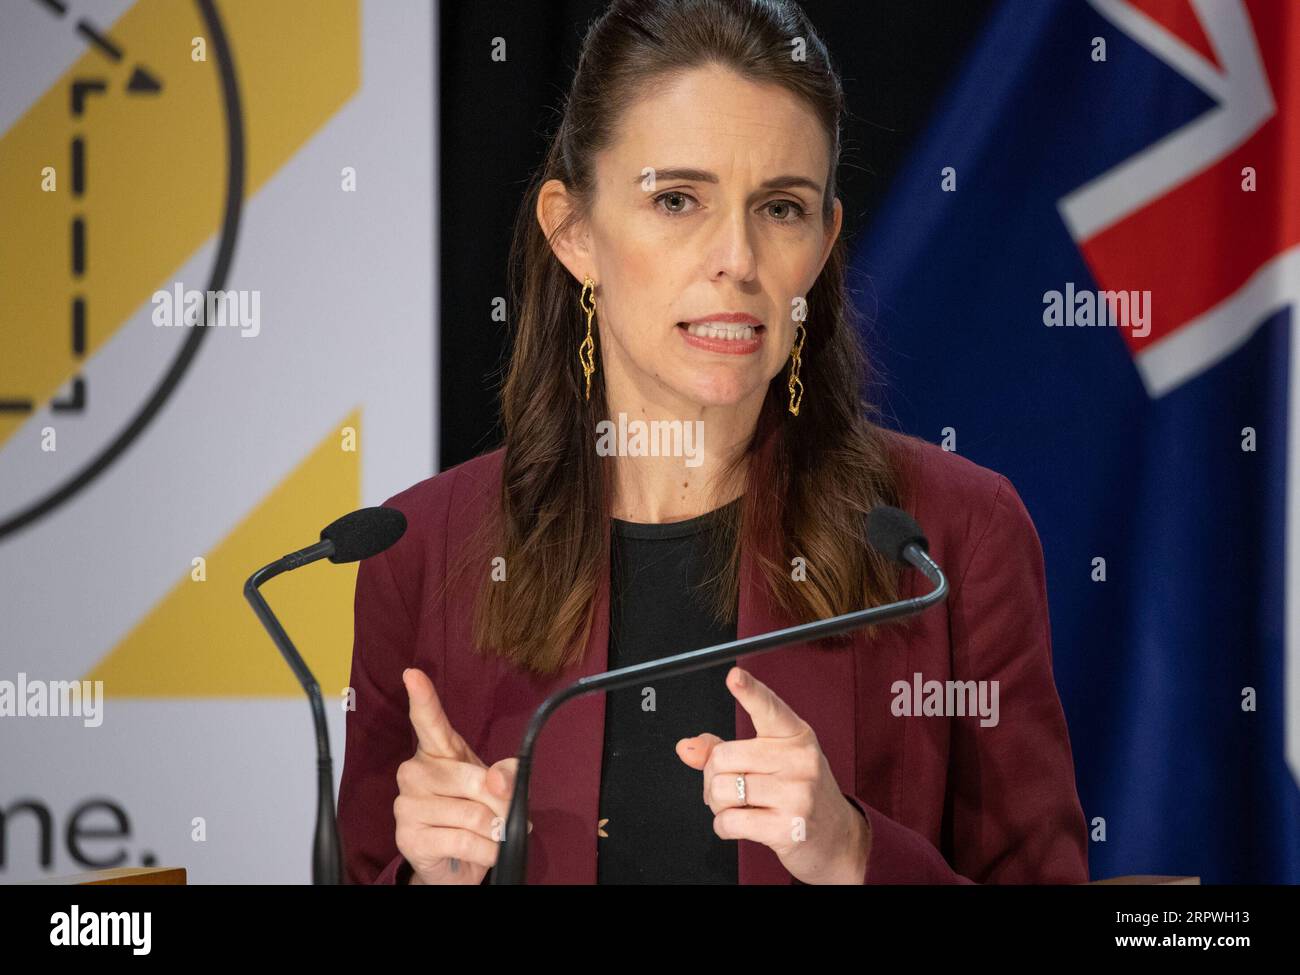 200427 -- WELLINGTON, April 27, 2020 Xinhua -- New Zealand s Prime Minister Jacinda Ardern speaks at a press conference on April 27, 2020, the final day of Alert Level 4, in Wellington, New Zealand. New Zealand will move from COVID-19 Alert Level 4 to Alert Level 3 at 11:59 p.m. local time on Monday, relaxing on some businesses. The country will stay in Alert Level 3 for two weeks before a further review and Alert Level decision on May 11. Mark Mitchell/NZME/Pool via Xinhua Wellington *** 200427 WELLINGTON, April 27, 2020 Xinhua New Zealand s Prime Minister Jacinda Ardern speaks at a press con Stock Photo